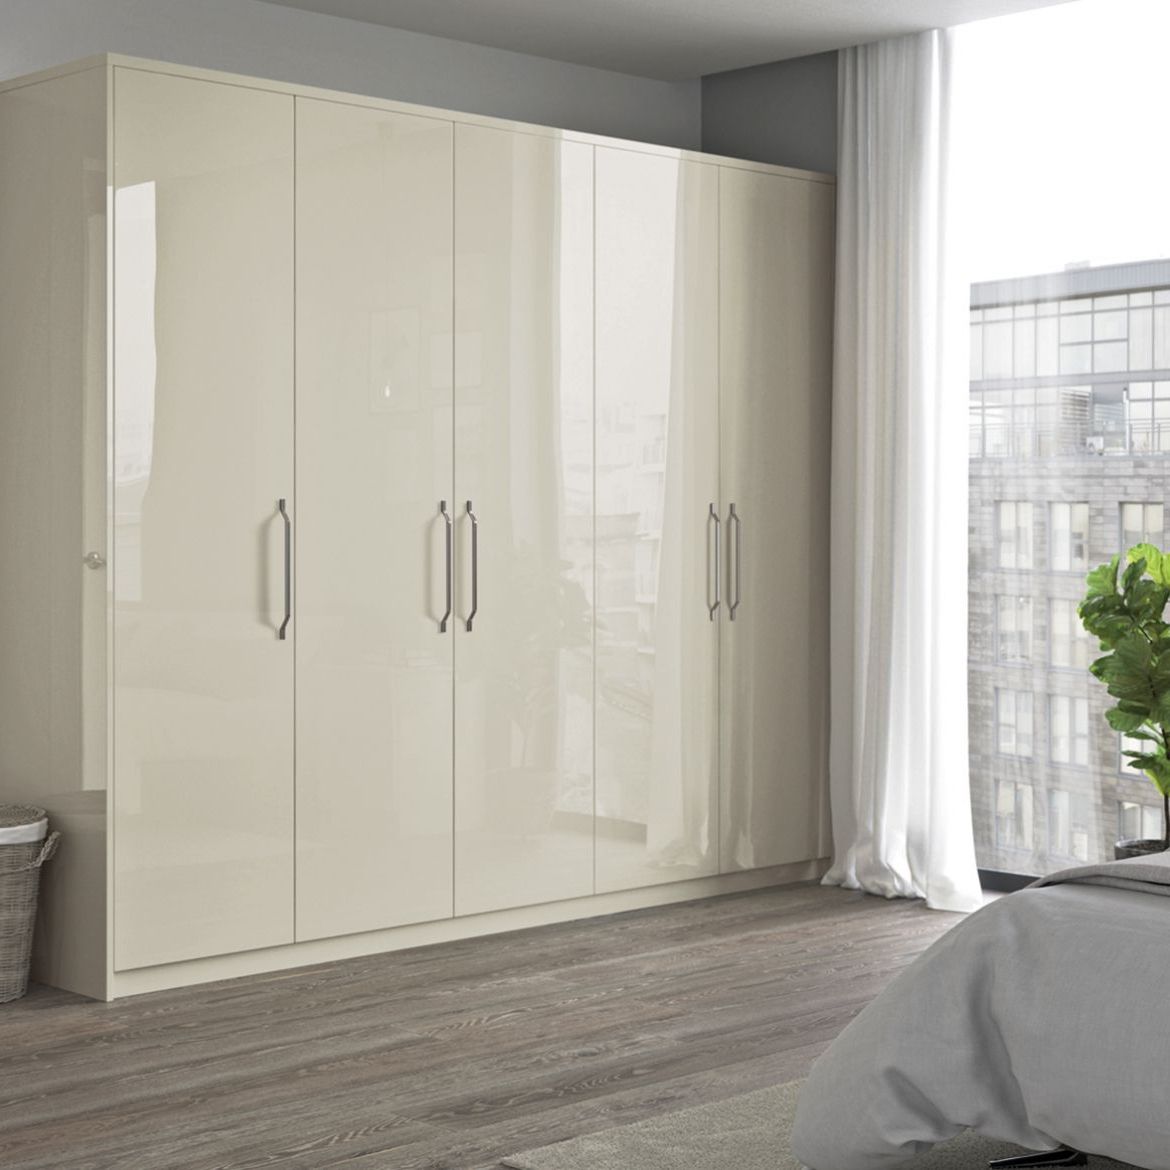 Reflections Wardrobe | Cash & Carry Kitchens Pertaining To High Gloss Wardrobes (View 8 of 20)